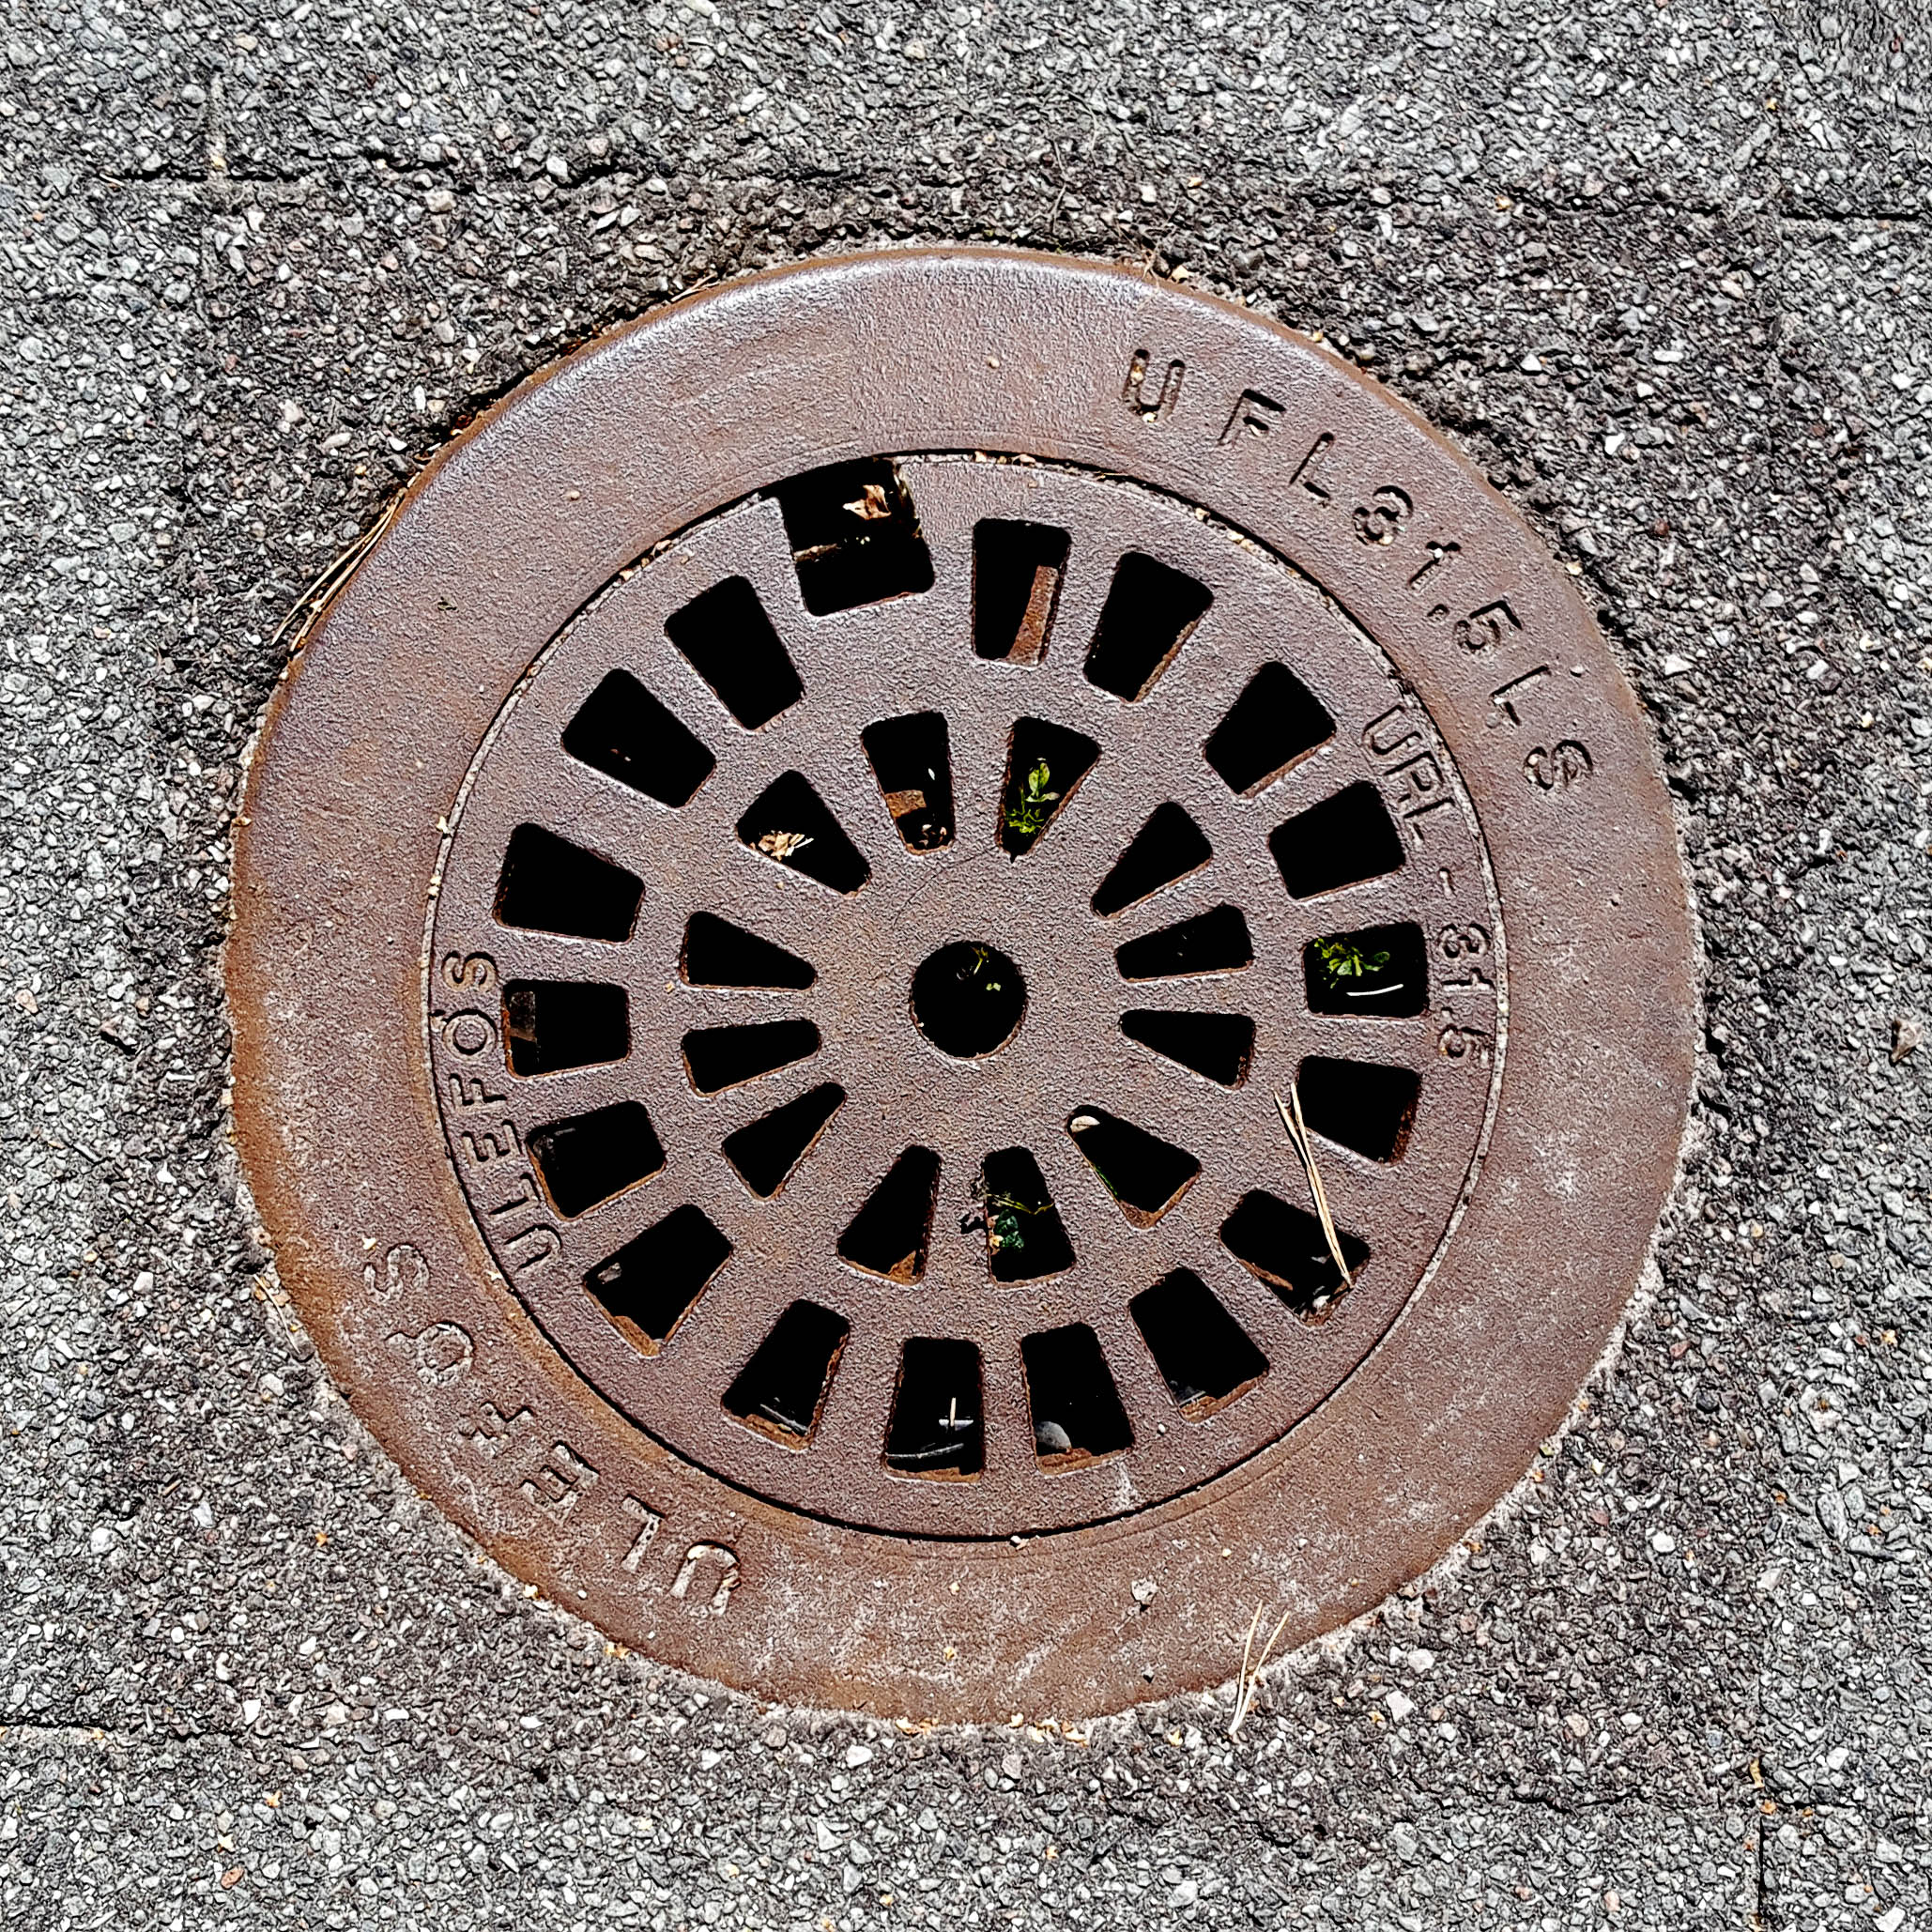 Manhole Cover, Frederiksvark Denmark - Cast iron surround inscribed with UFL31. 5LS ULEFOS - Inner, cut out circular pattern